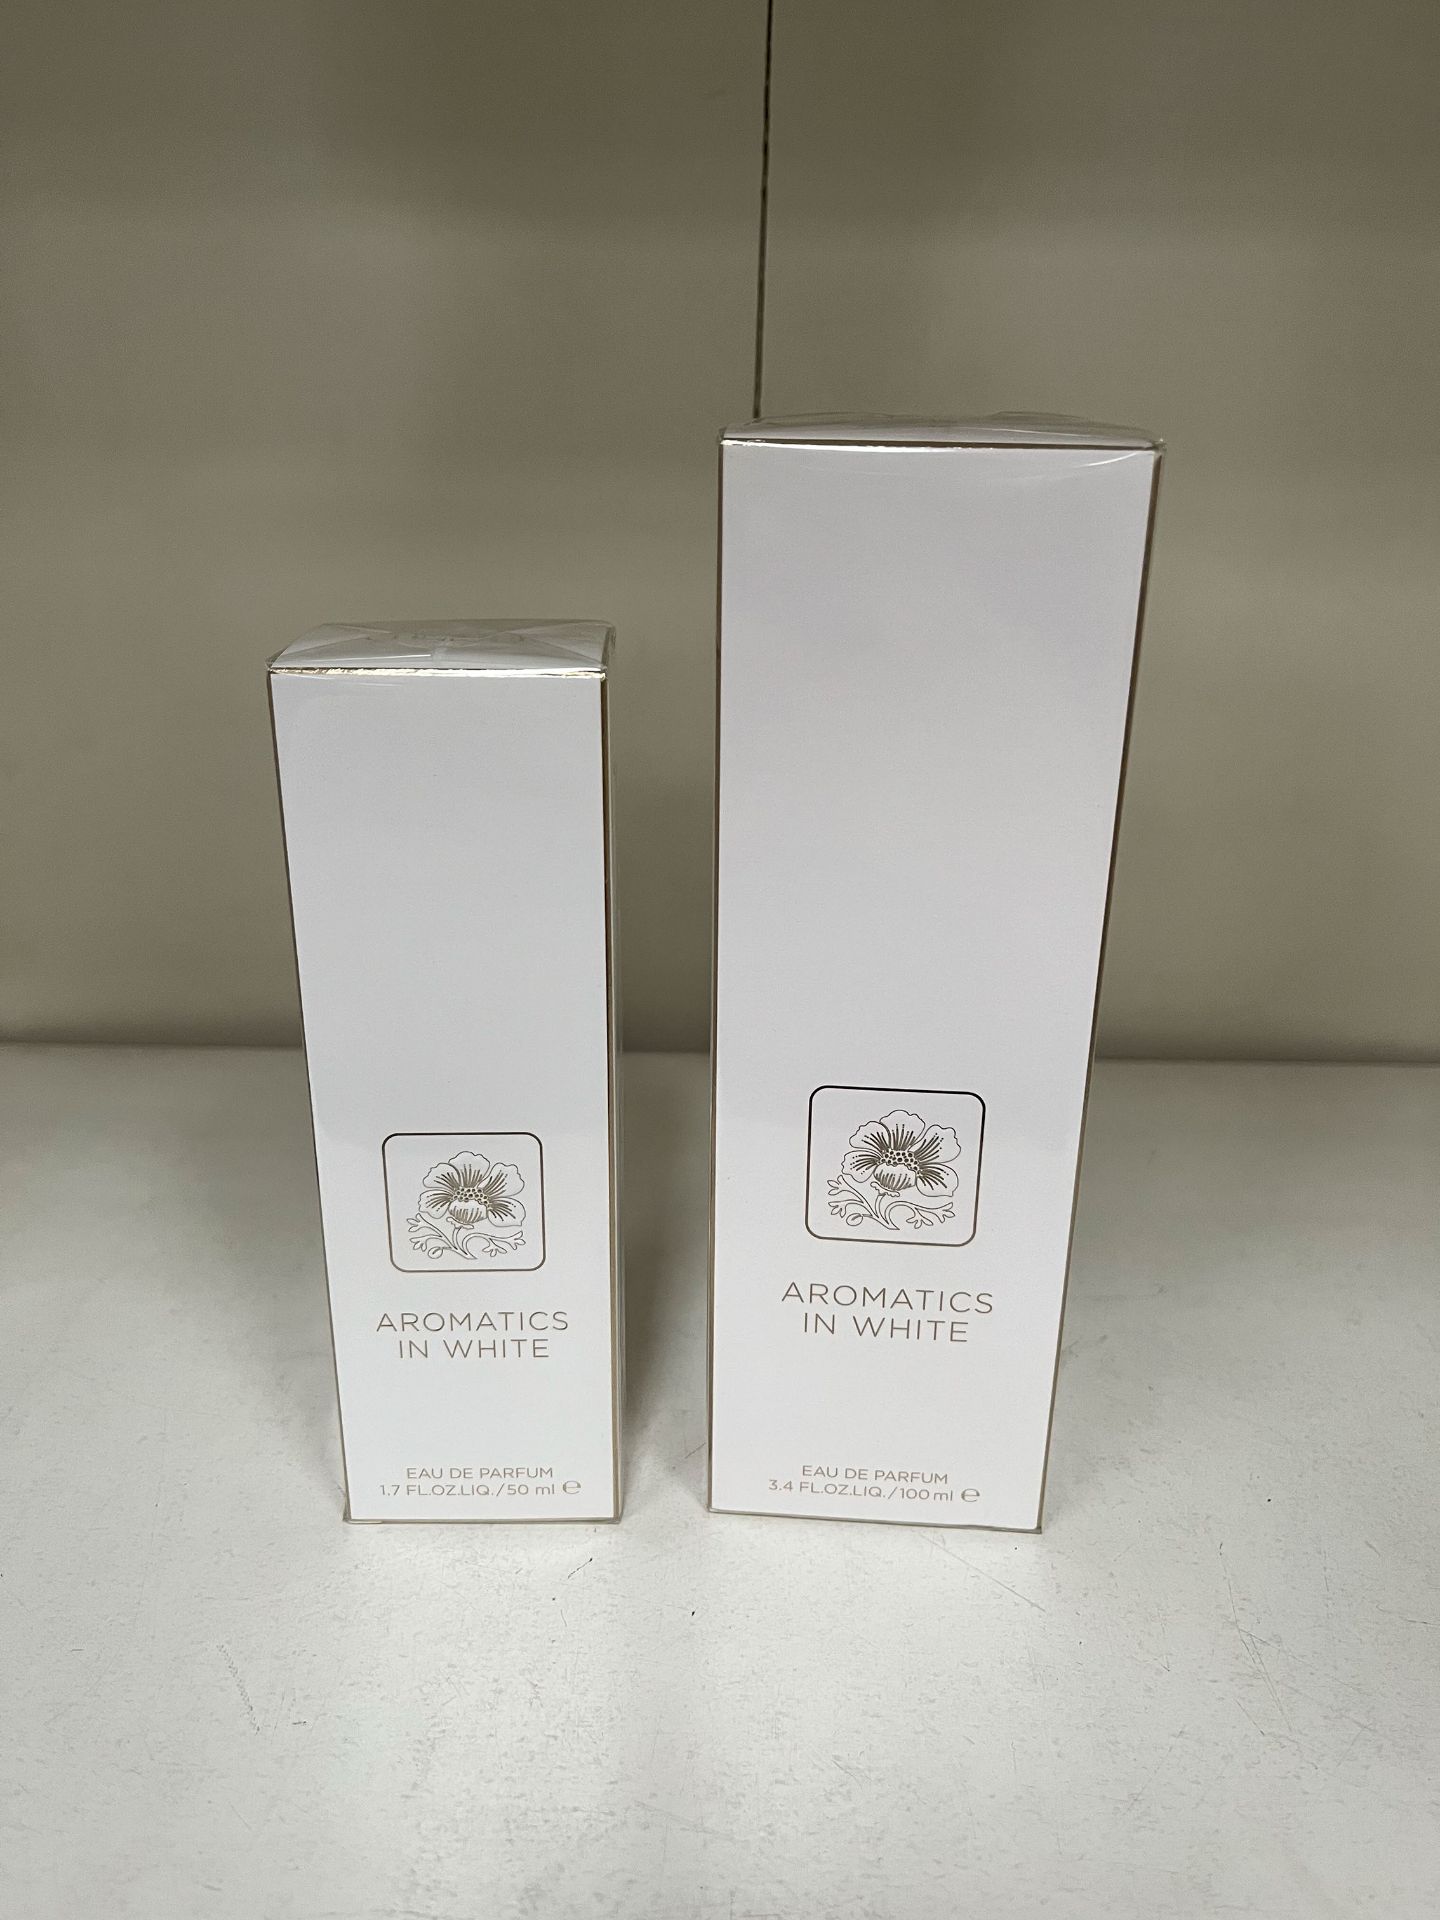 2x Clinique Aromatic in White Perfumes